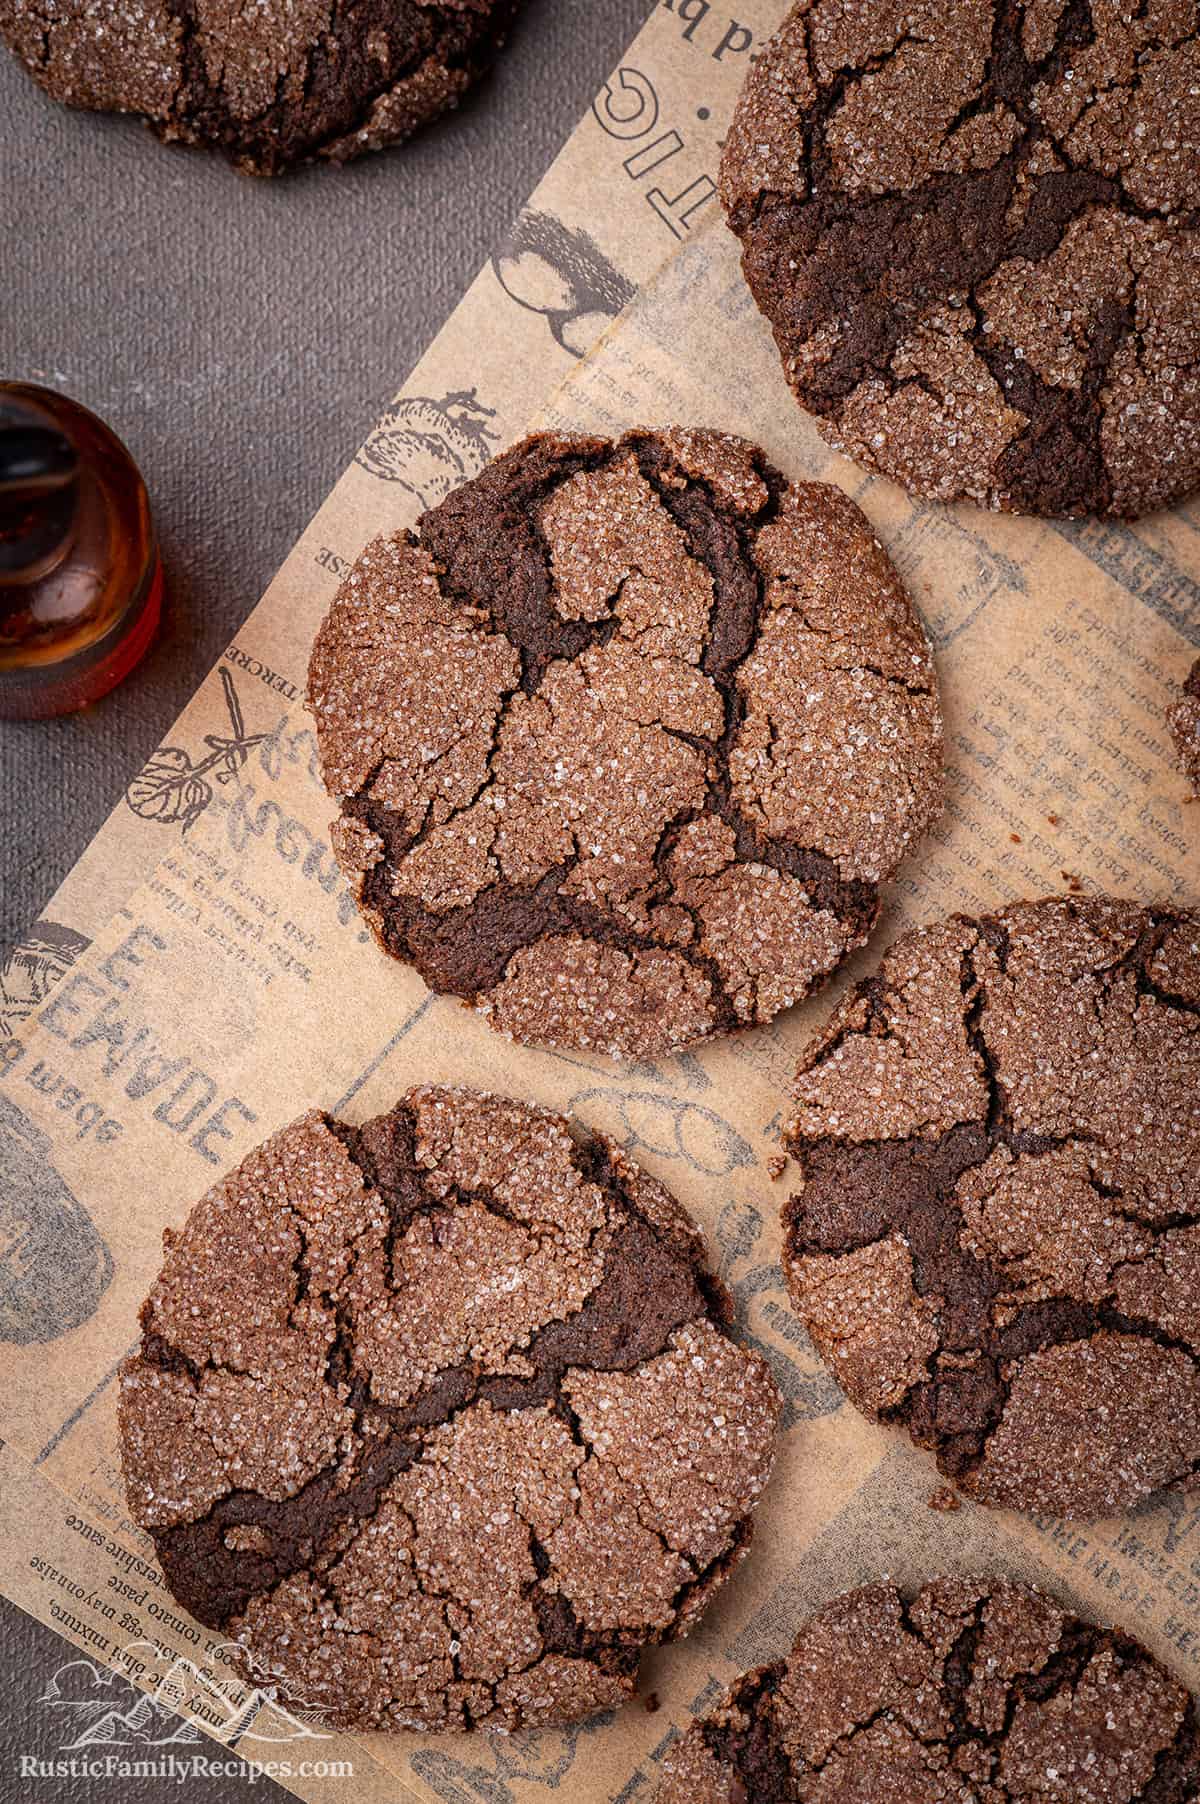 Chocolate sugar cookies cooling on parchment paper